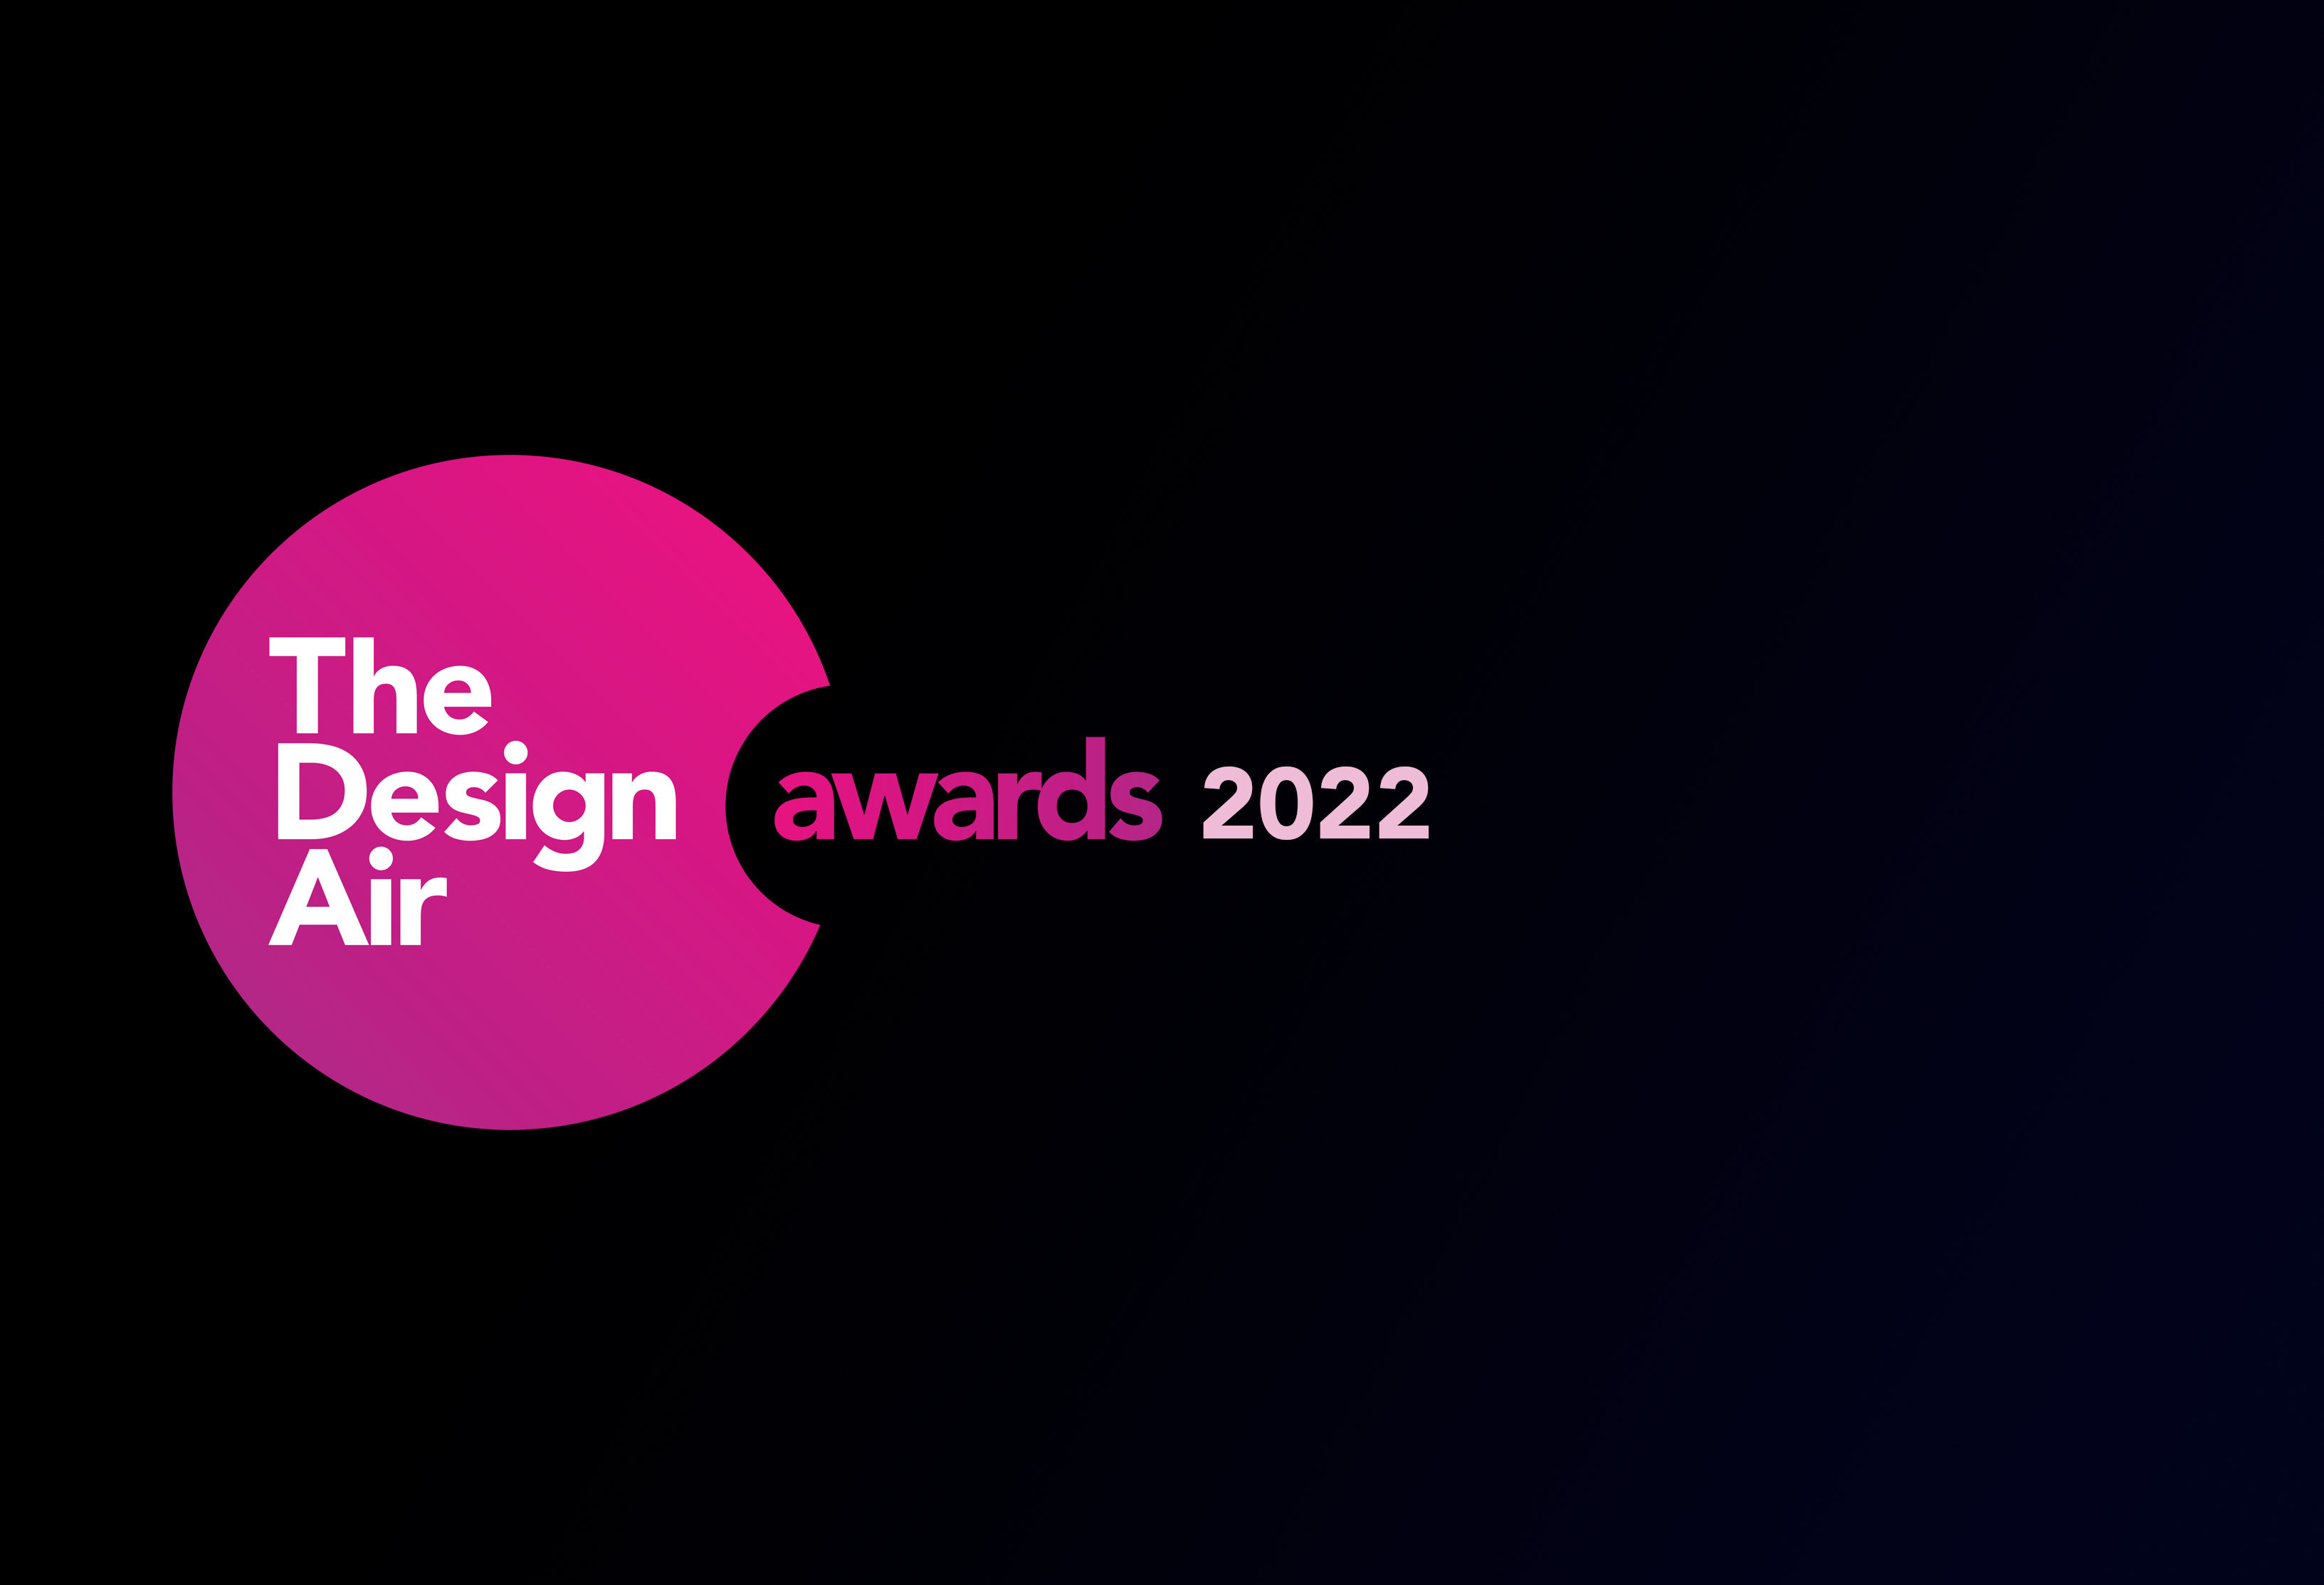 Congratulations to TheDesignAir Award Winners, 2022